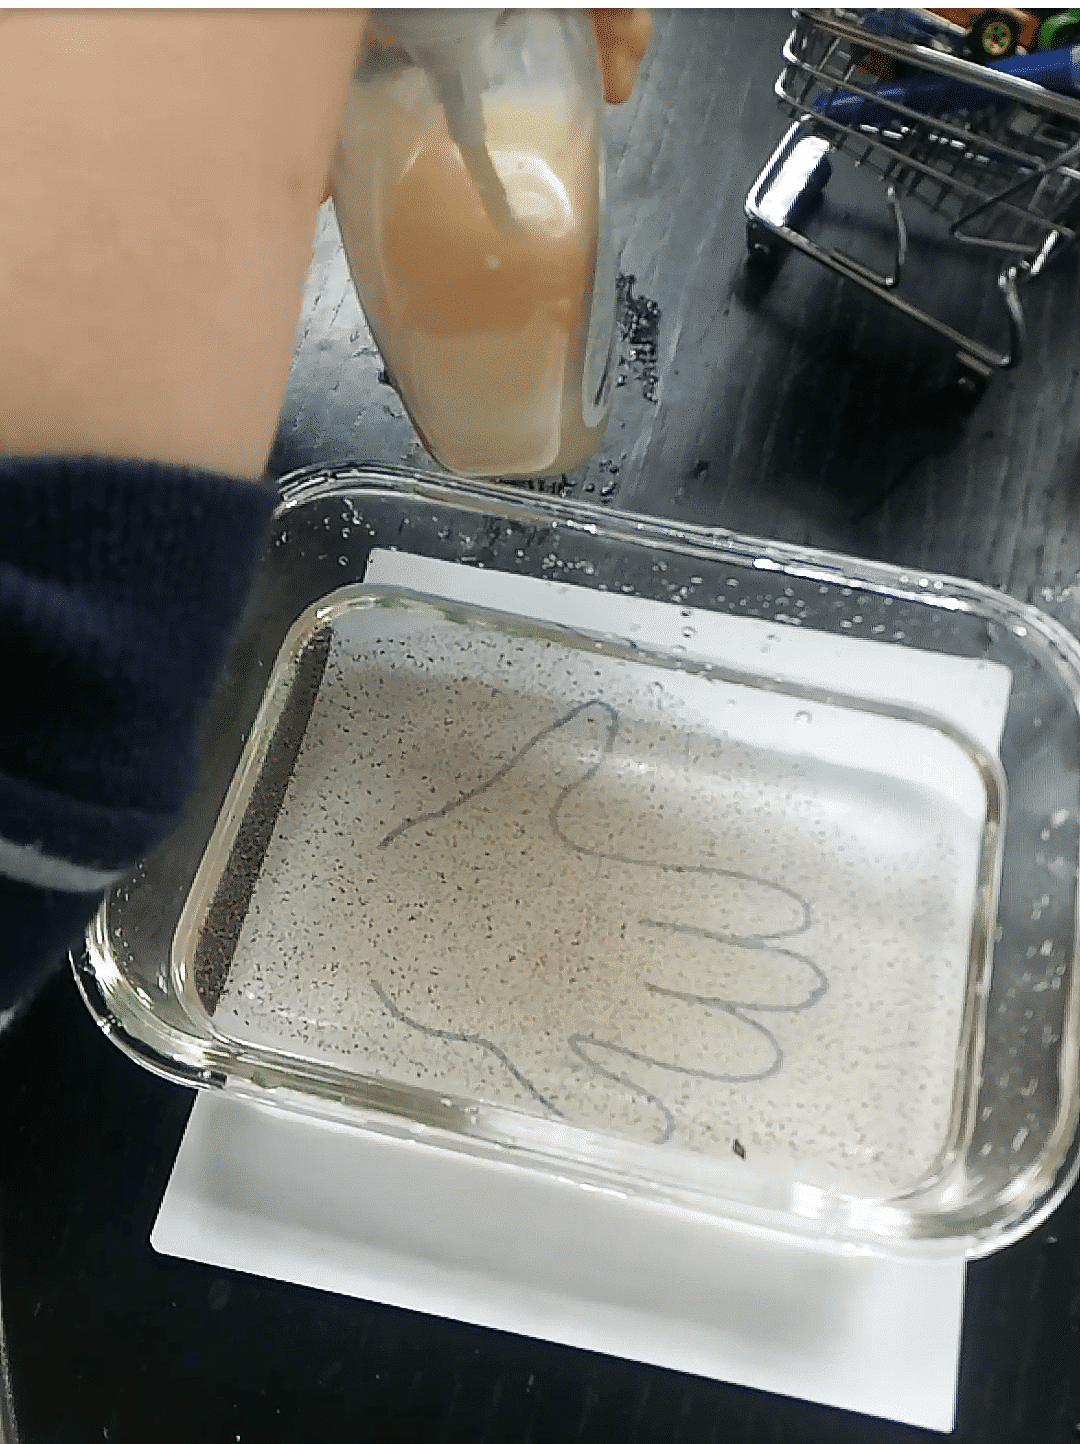 This is a simple and fun washing hands science experiment using supplies you already have at home. No-prep or mess it's sure to impress!